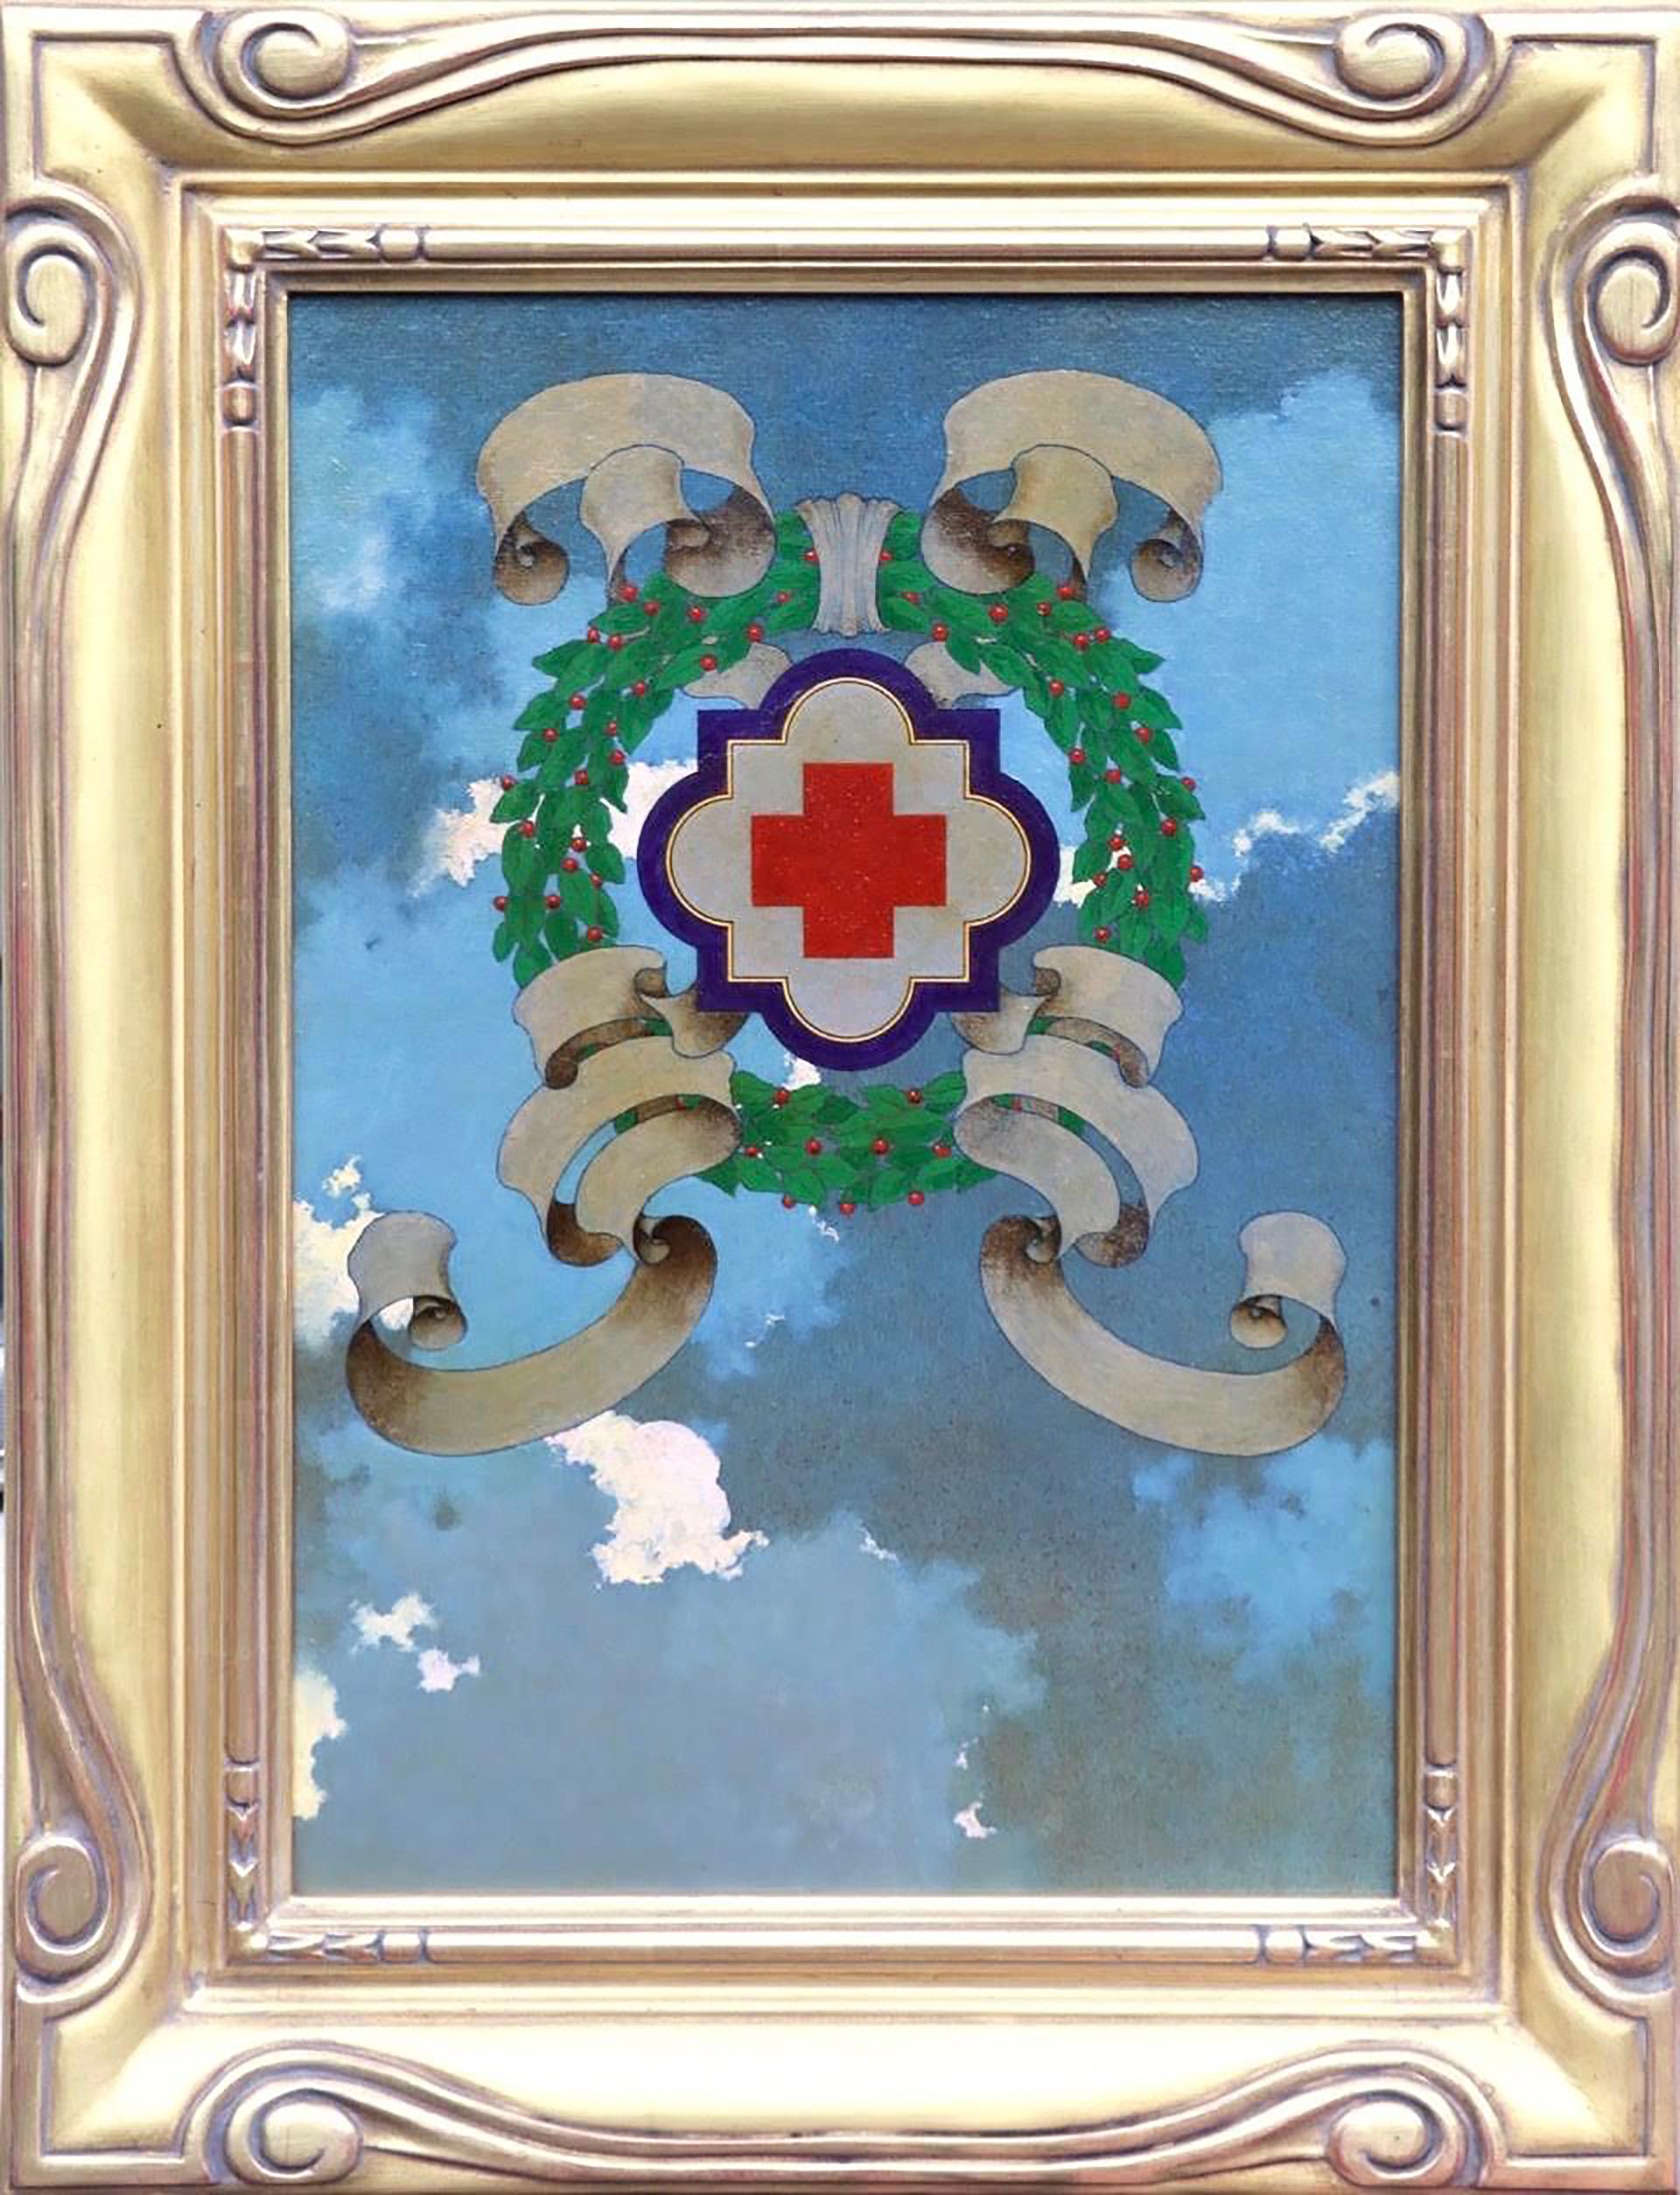 Original Illustration for The Red Cross - Painting by Maxfield Parrish